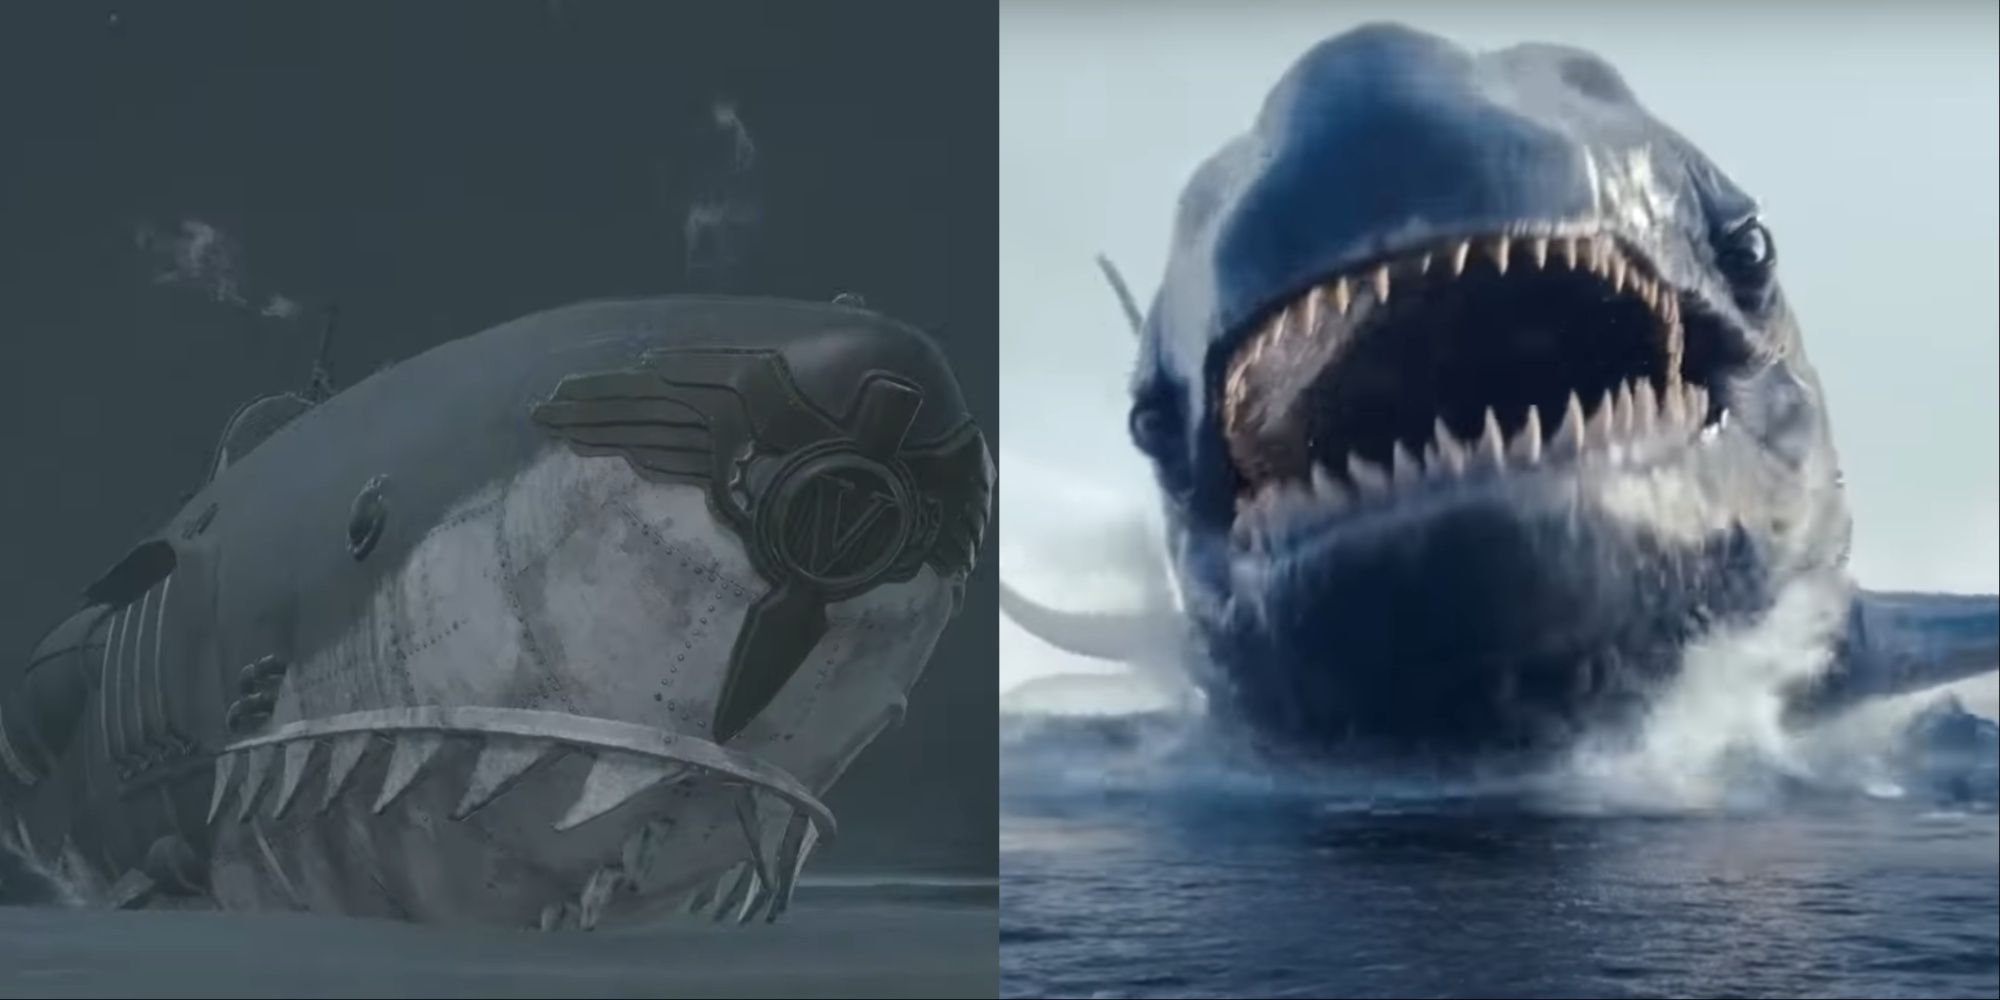 Split-Image of Venigni's submarine landing on the shore in Lies of P and the live-action design of Monstro in Disney's Pinocchio remake.